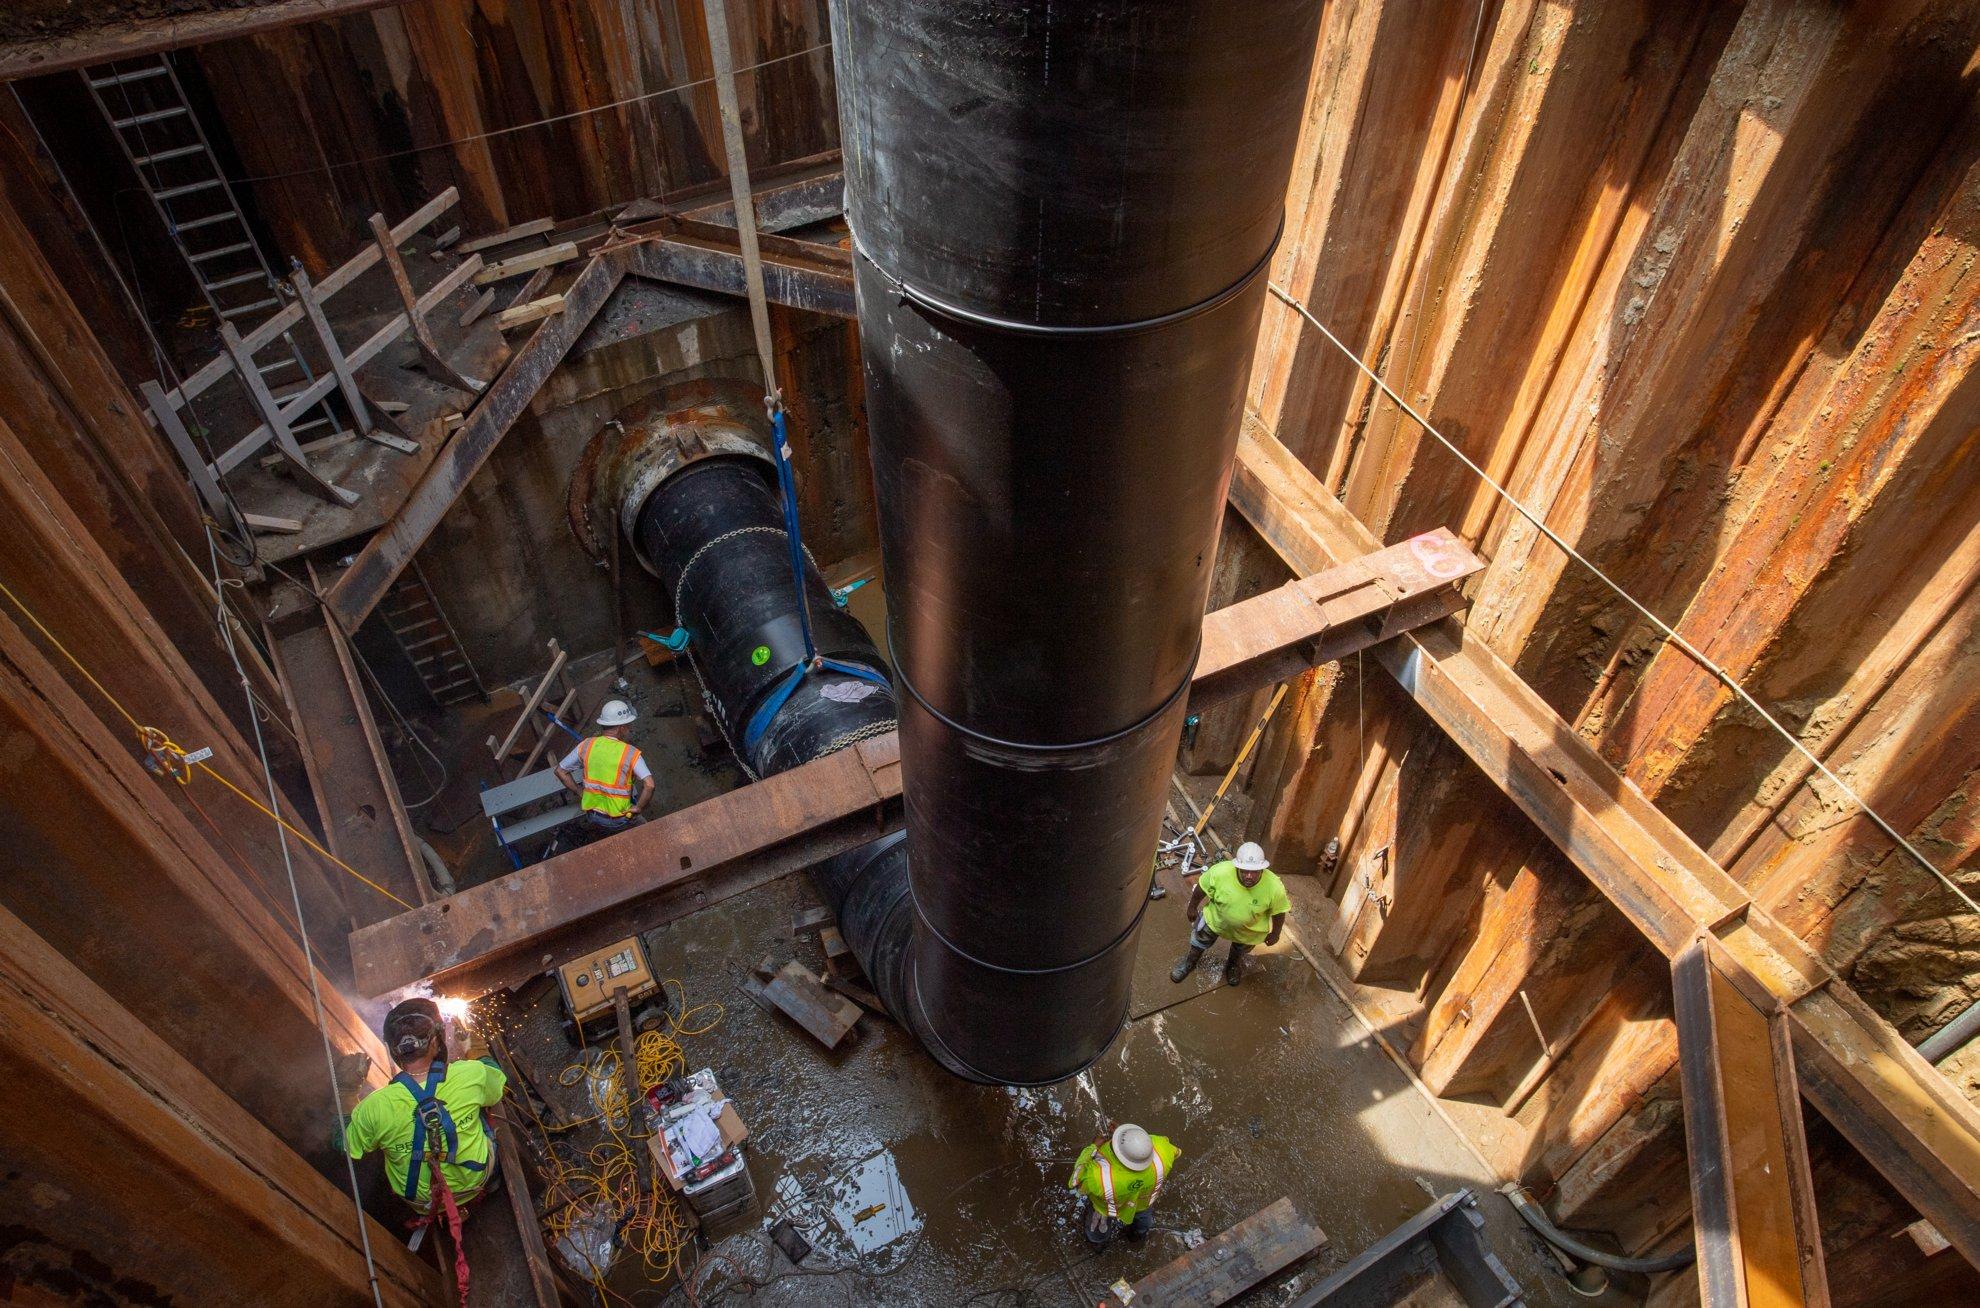 Four workers are in an underground, reinforced area around a large industrial pipe.